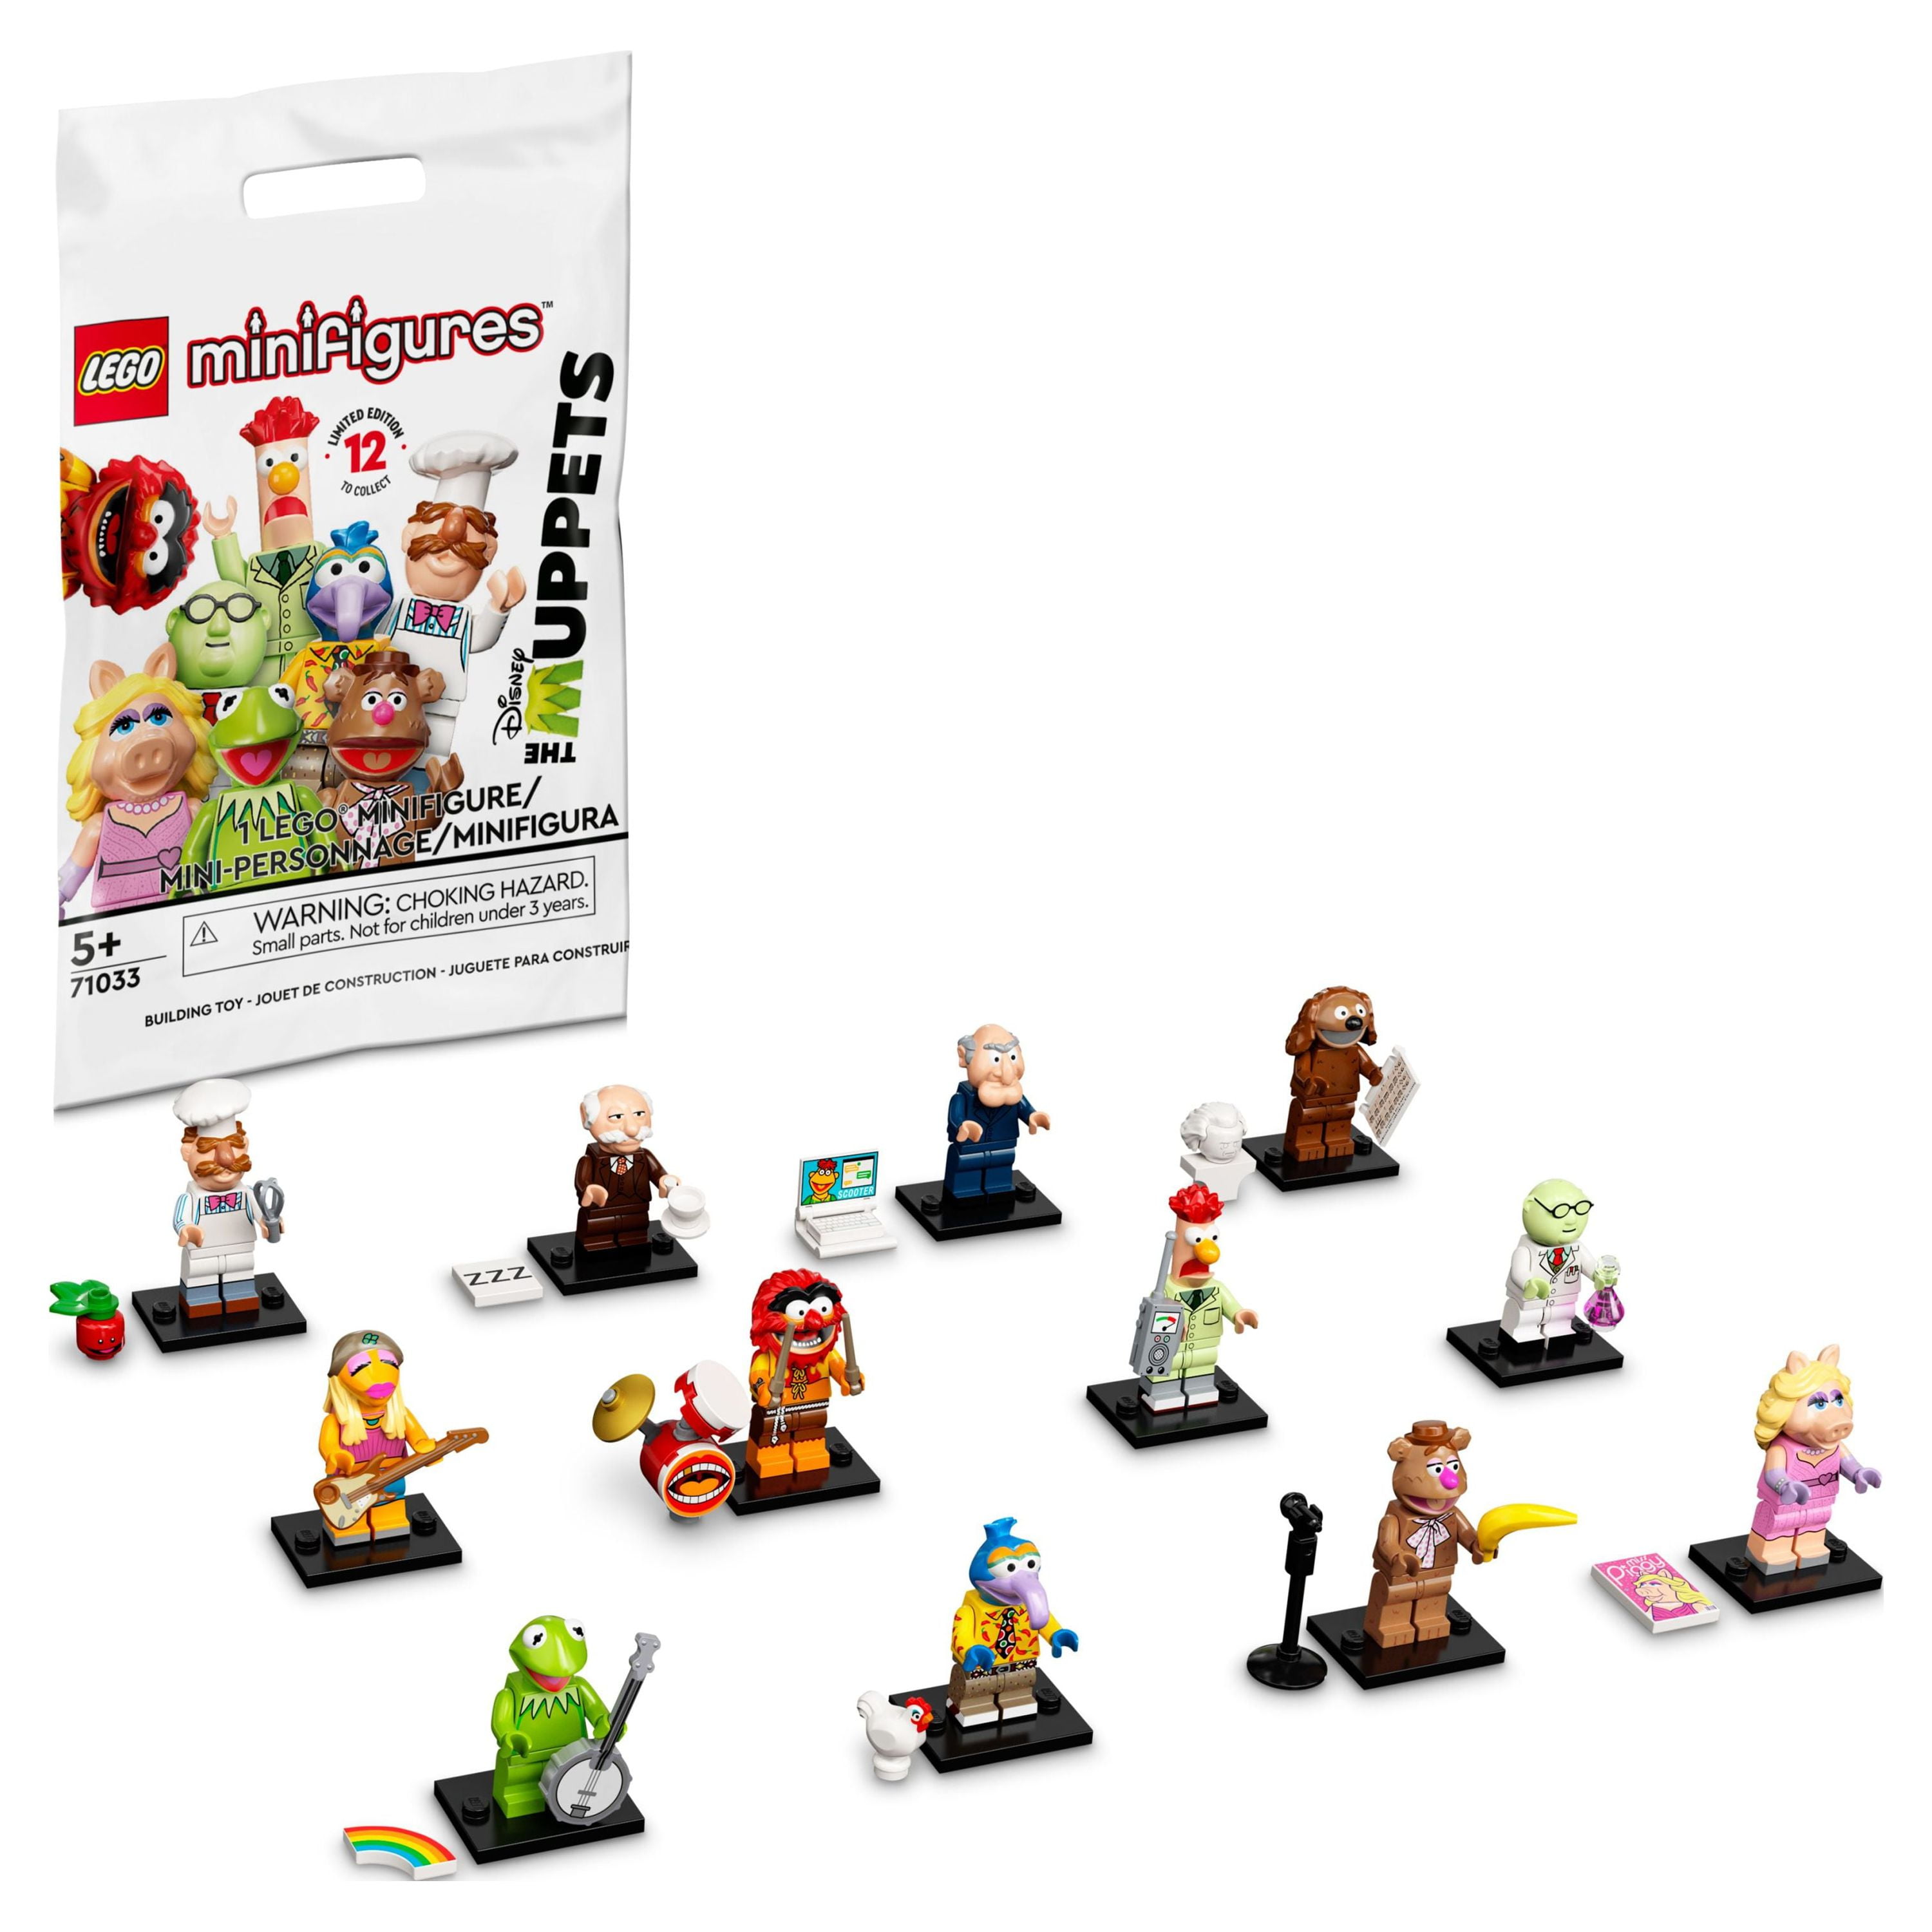 Meet the LEGO Muppets Minifigures - IGN